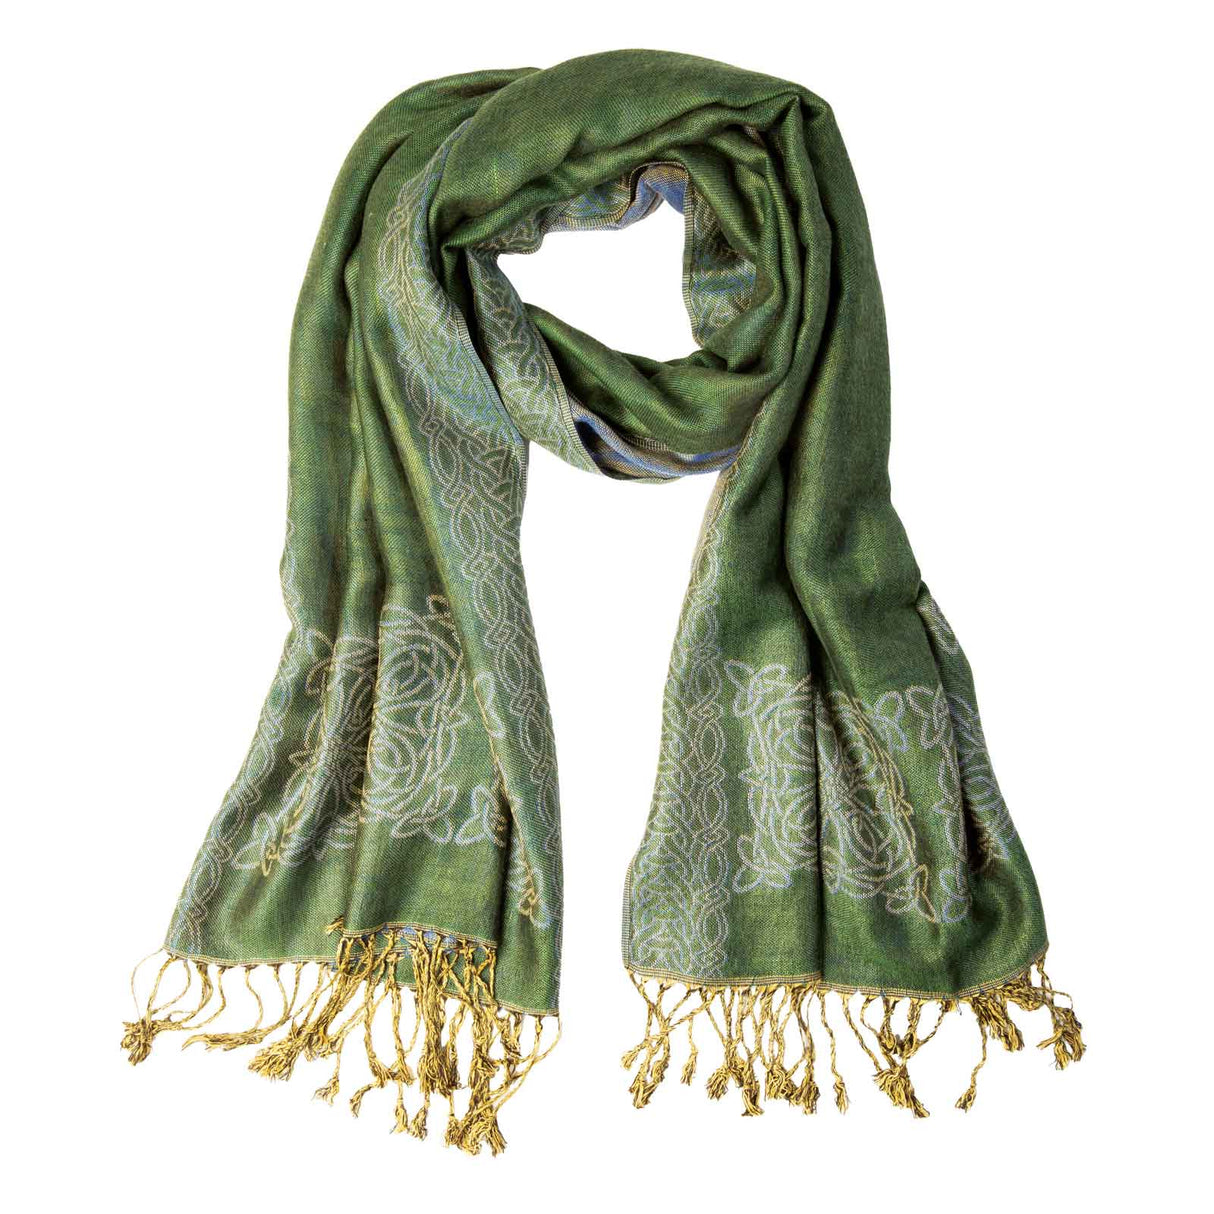 Celtic Knot Scarf- Green, Blue, and Gold - Creative Irish Gifts